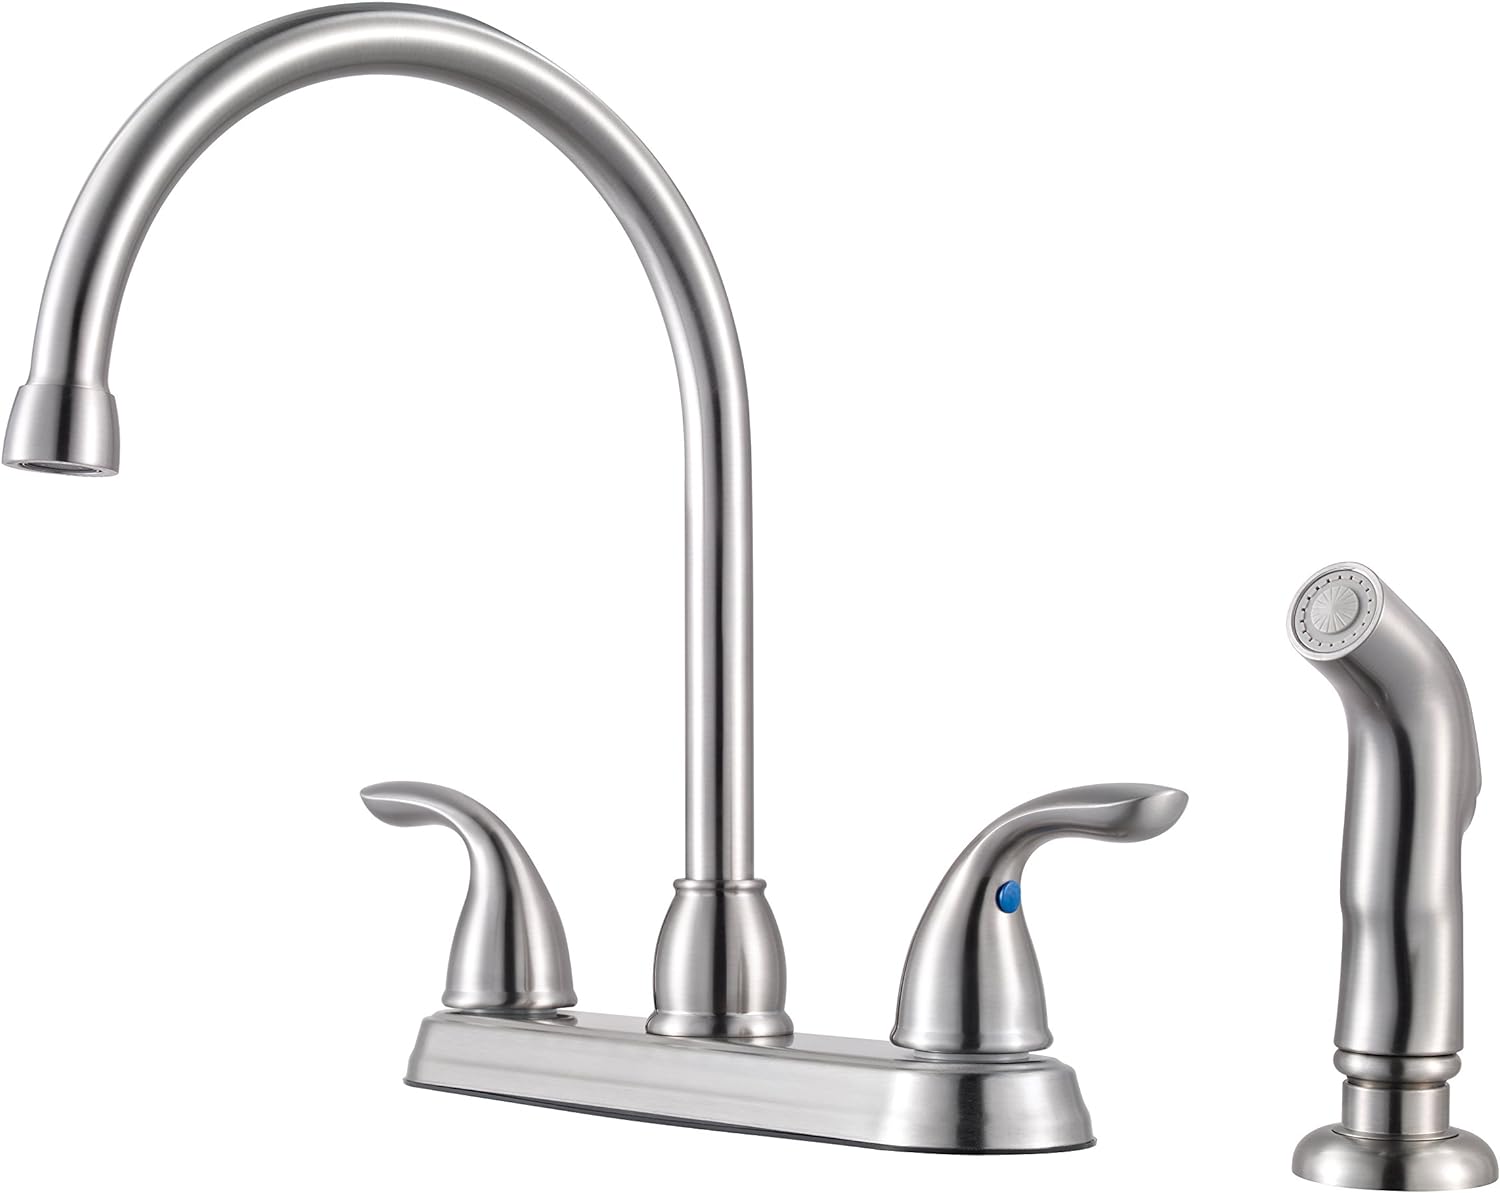 Pfister Pfirst Series Kitchen Sink Faucet with Side Sprayer, 2-Handle, High Arc, Stainless Steel Finish, G136500S